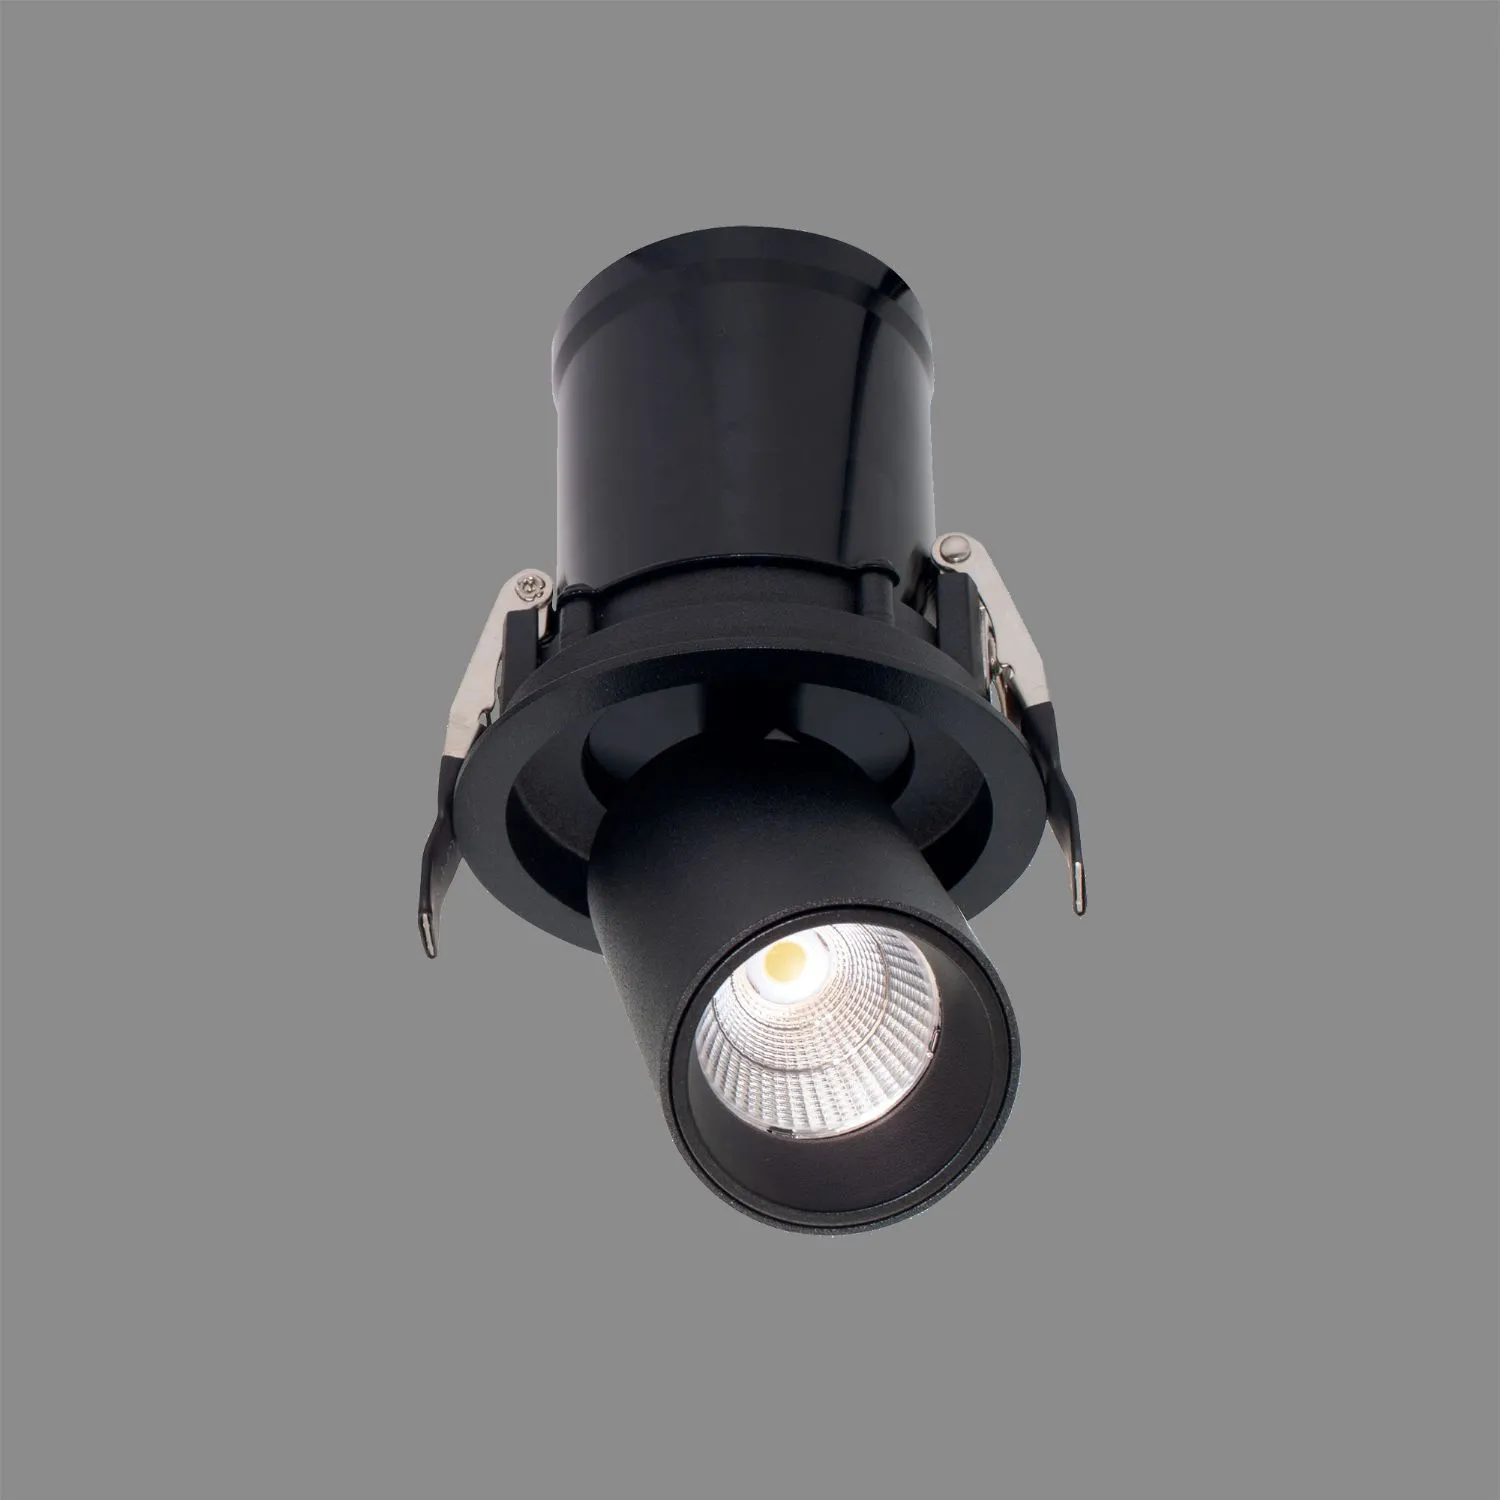 Garda Retractable Recessed Swivel Spotlight, 7W, 3000K, 610lm, Black, Cut Out 84mm, Driver Included, Driver Included, 3yrs Warranty